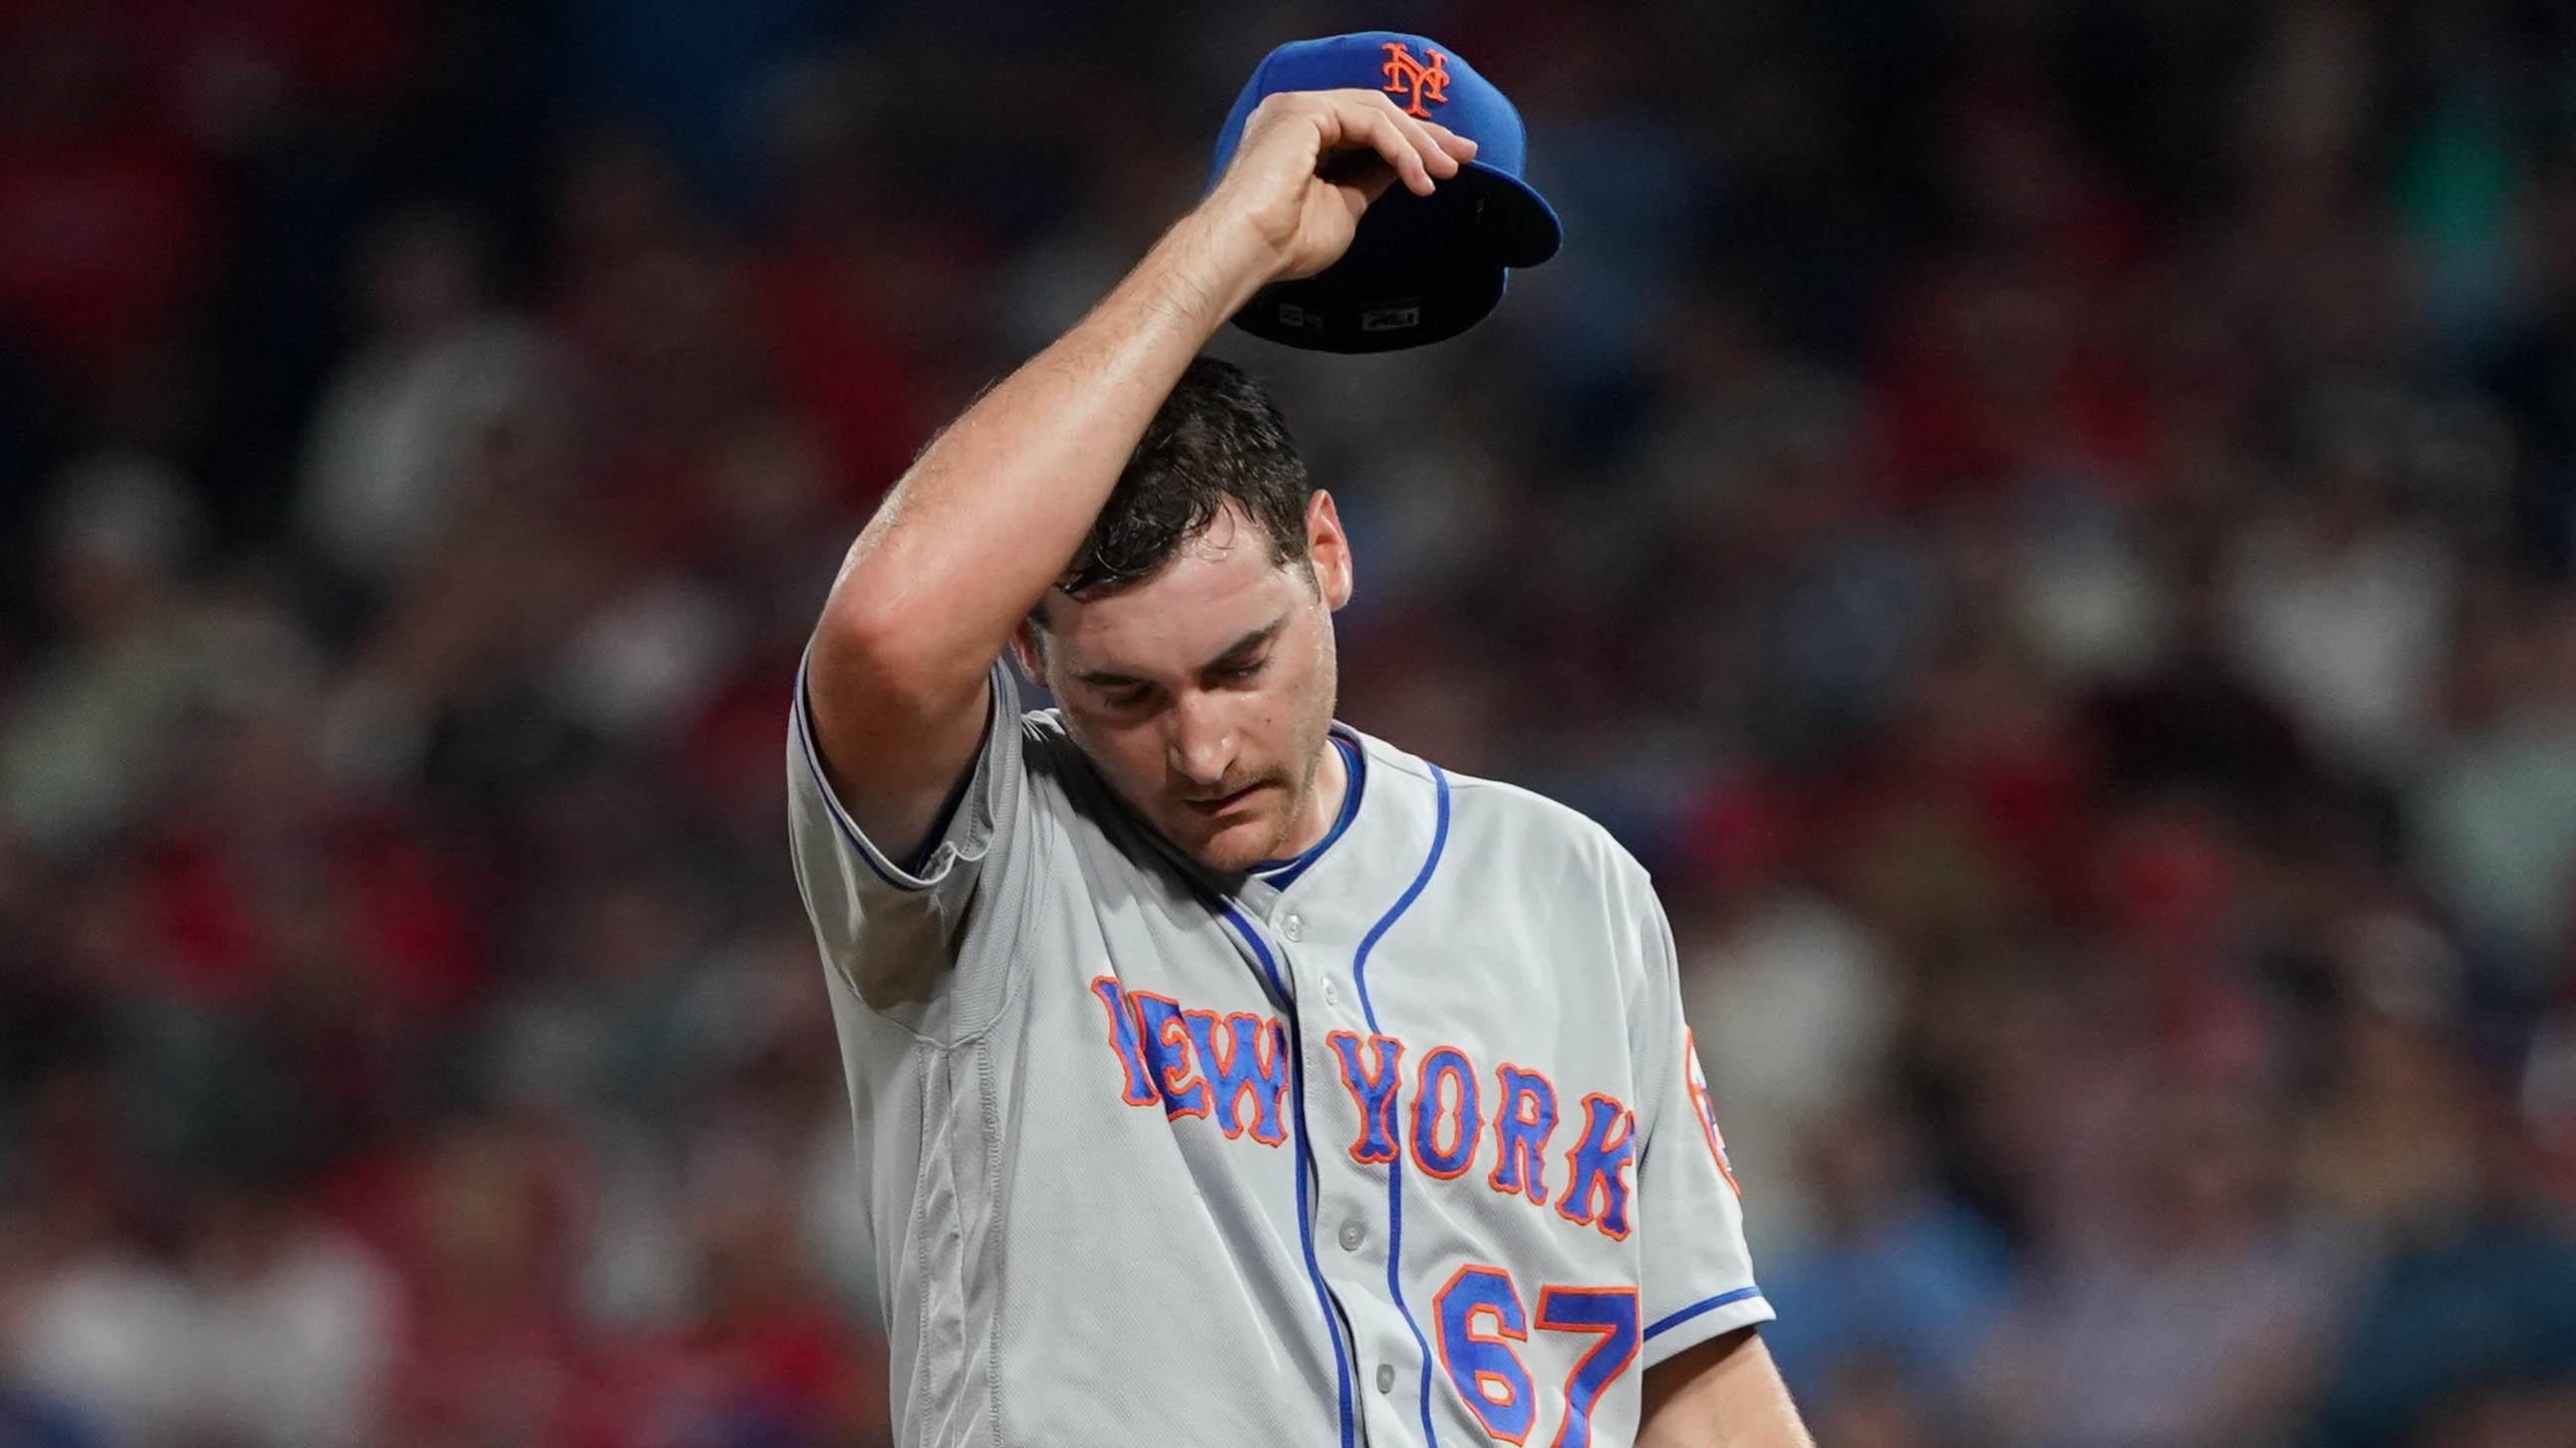 Jun 26, 2019; Philadelphia, PA, USA; New York Mets starting pitcher Seth Lugo (67) reacts after a Philadelphia Phillies score during the seventh inning at Citizens Bank Park. Mandatory Credit: Bill Streicher-USA TODAY Sports / Bill Streicher-USA TODAY Sports